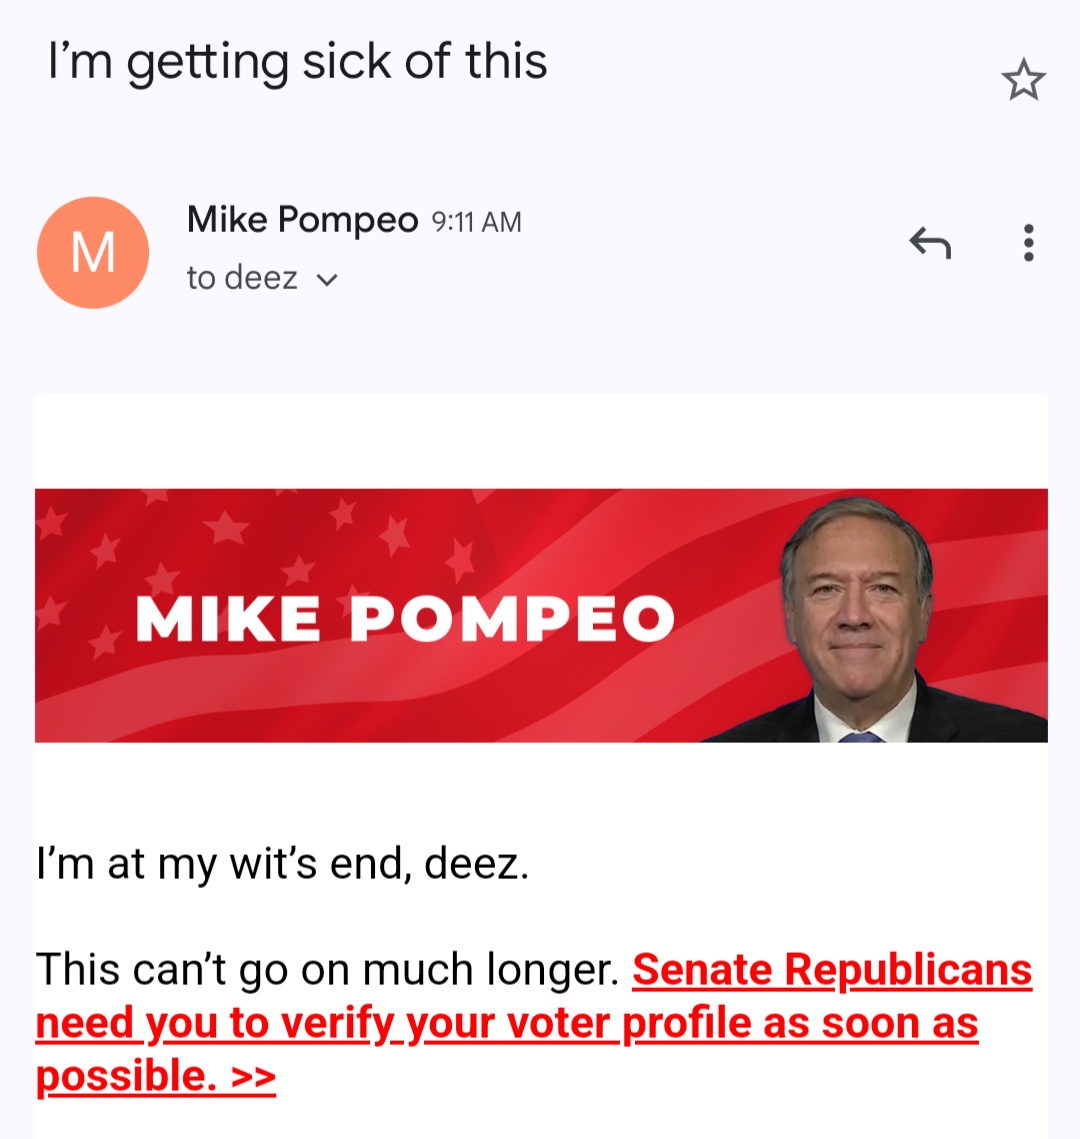 We're gonna need a wellness check on Mike Pompeo.